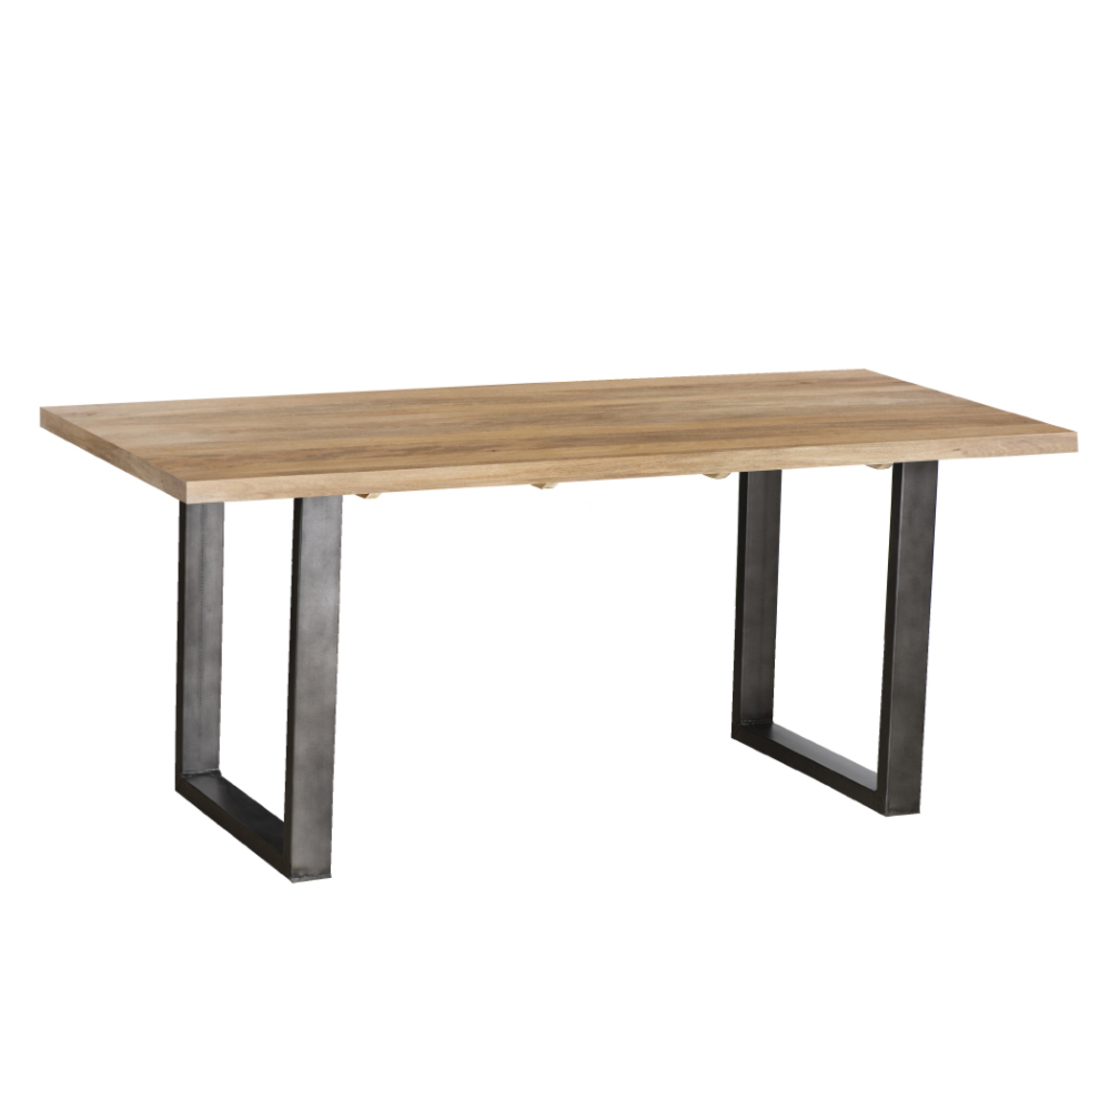 CRAFT 200 TABLE SOLID WOOD MANGO NATURAL METAL IN